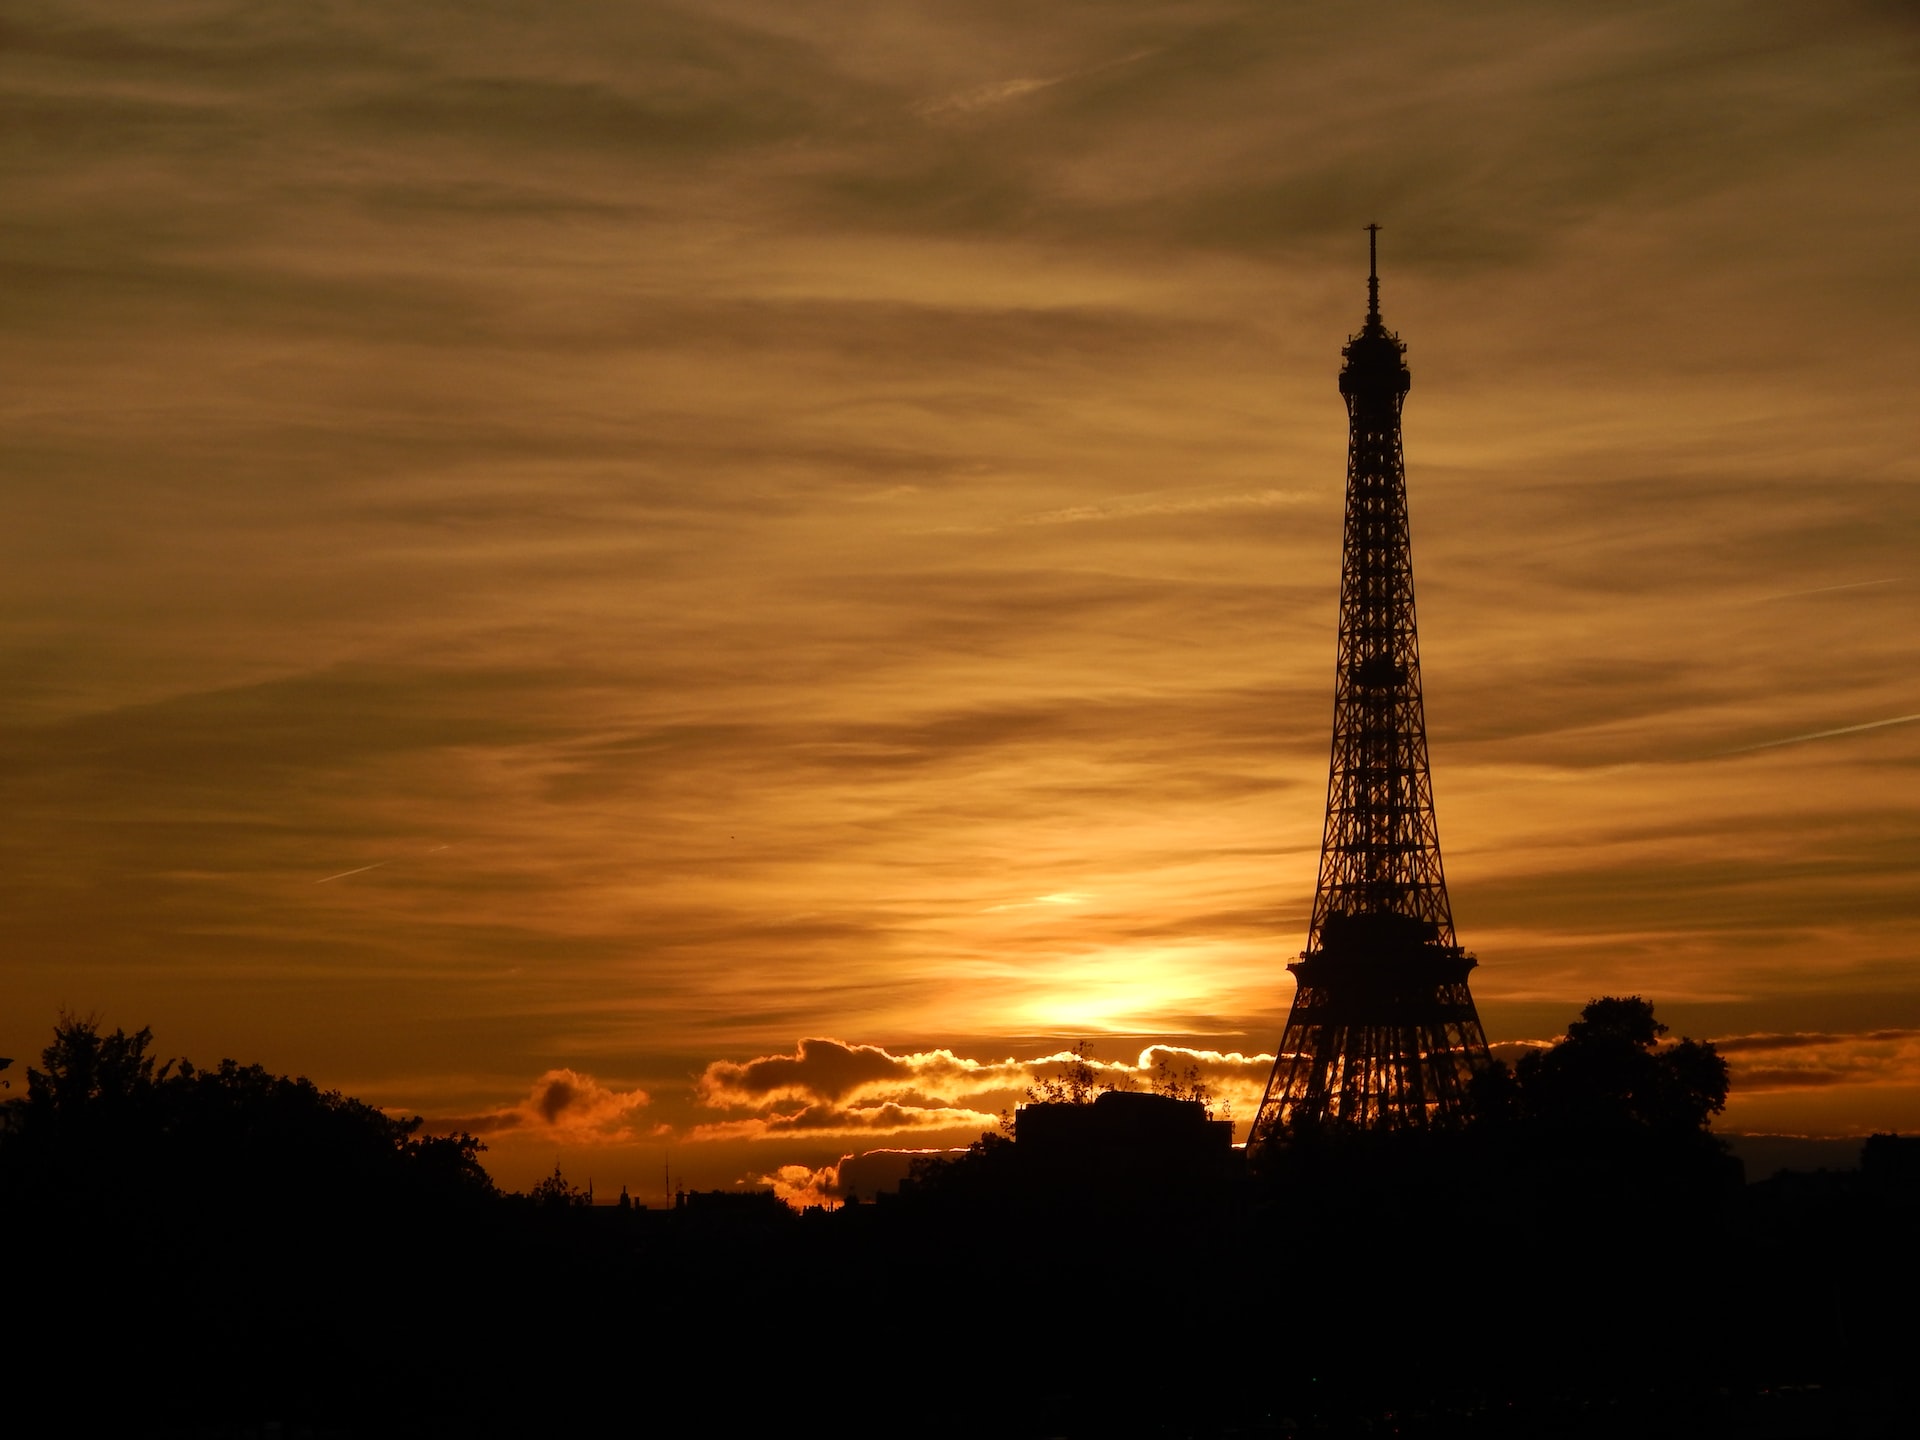 silhouette of the Eiffel Tower before it's lit up at night